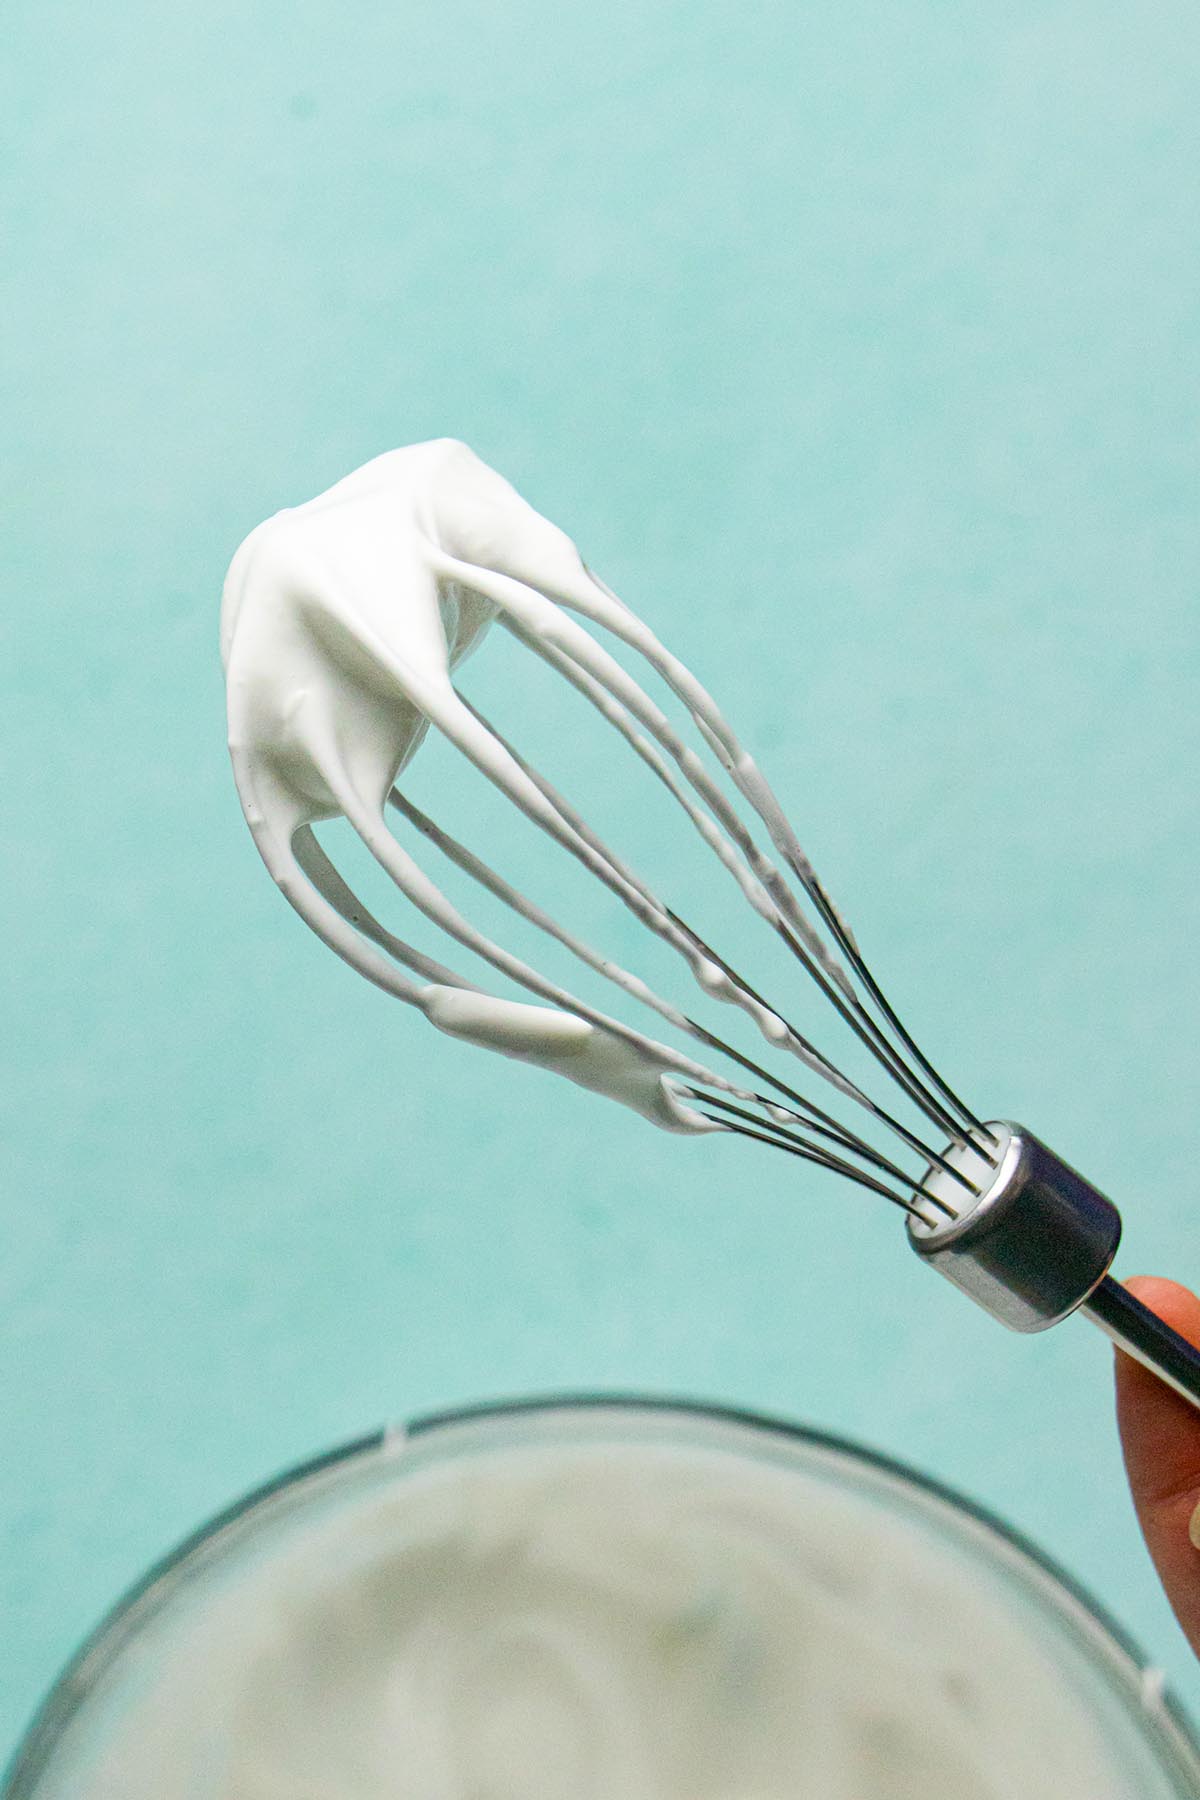 whisk with aquafaba on the tip, so you can see the texture of the soft peaks